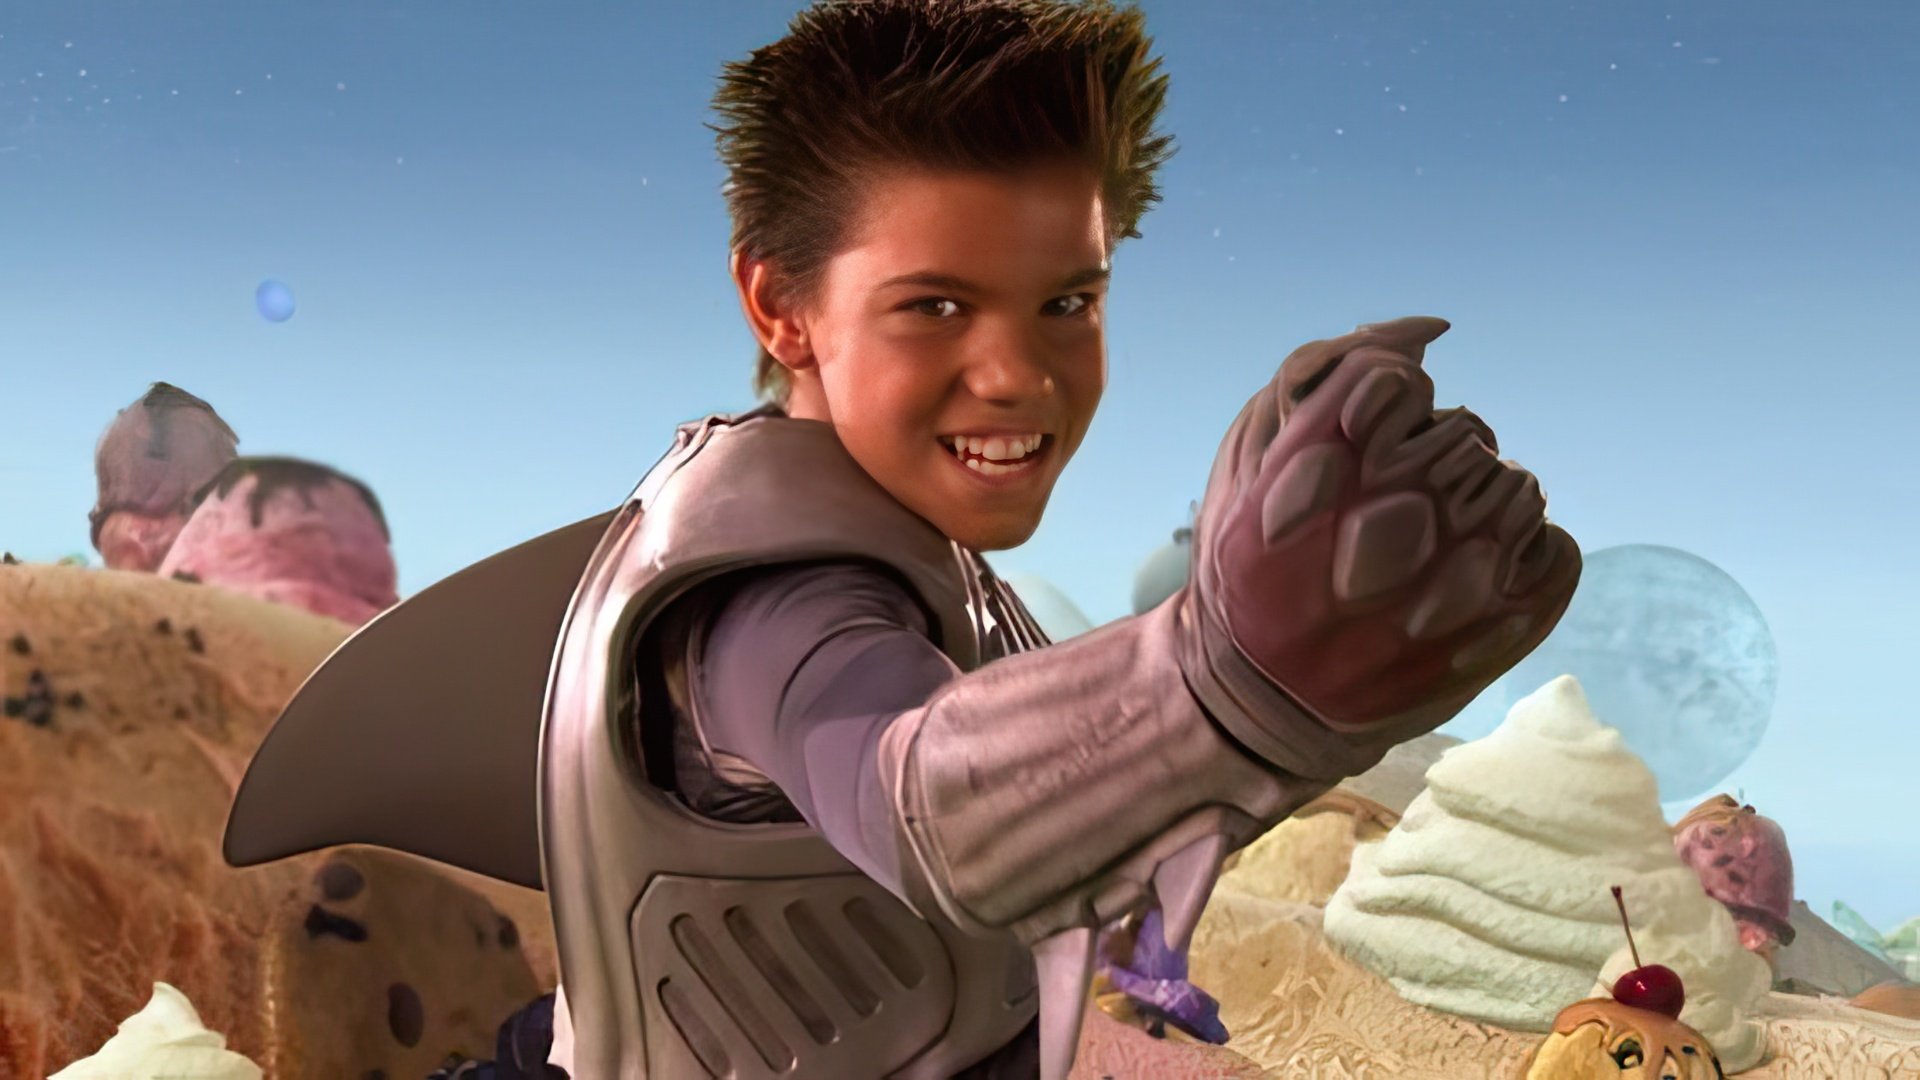 Taylor Lautner in 'The Adventures of Sharkboy and Lavagirl'